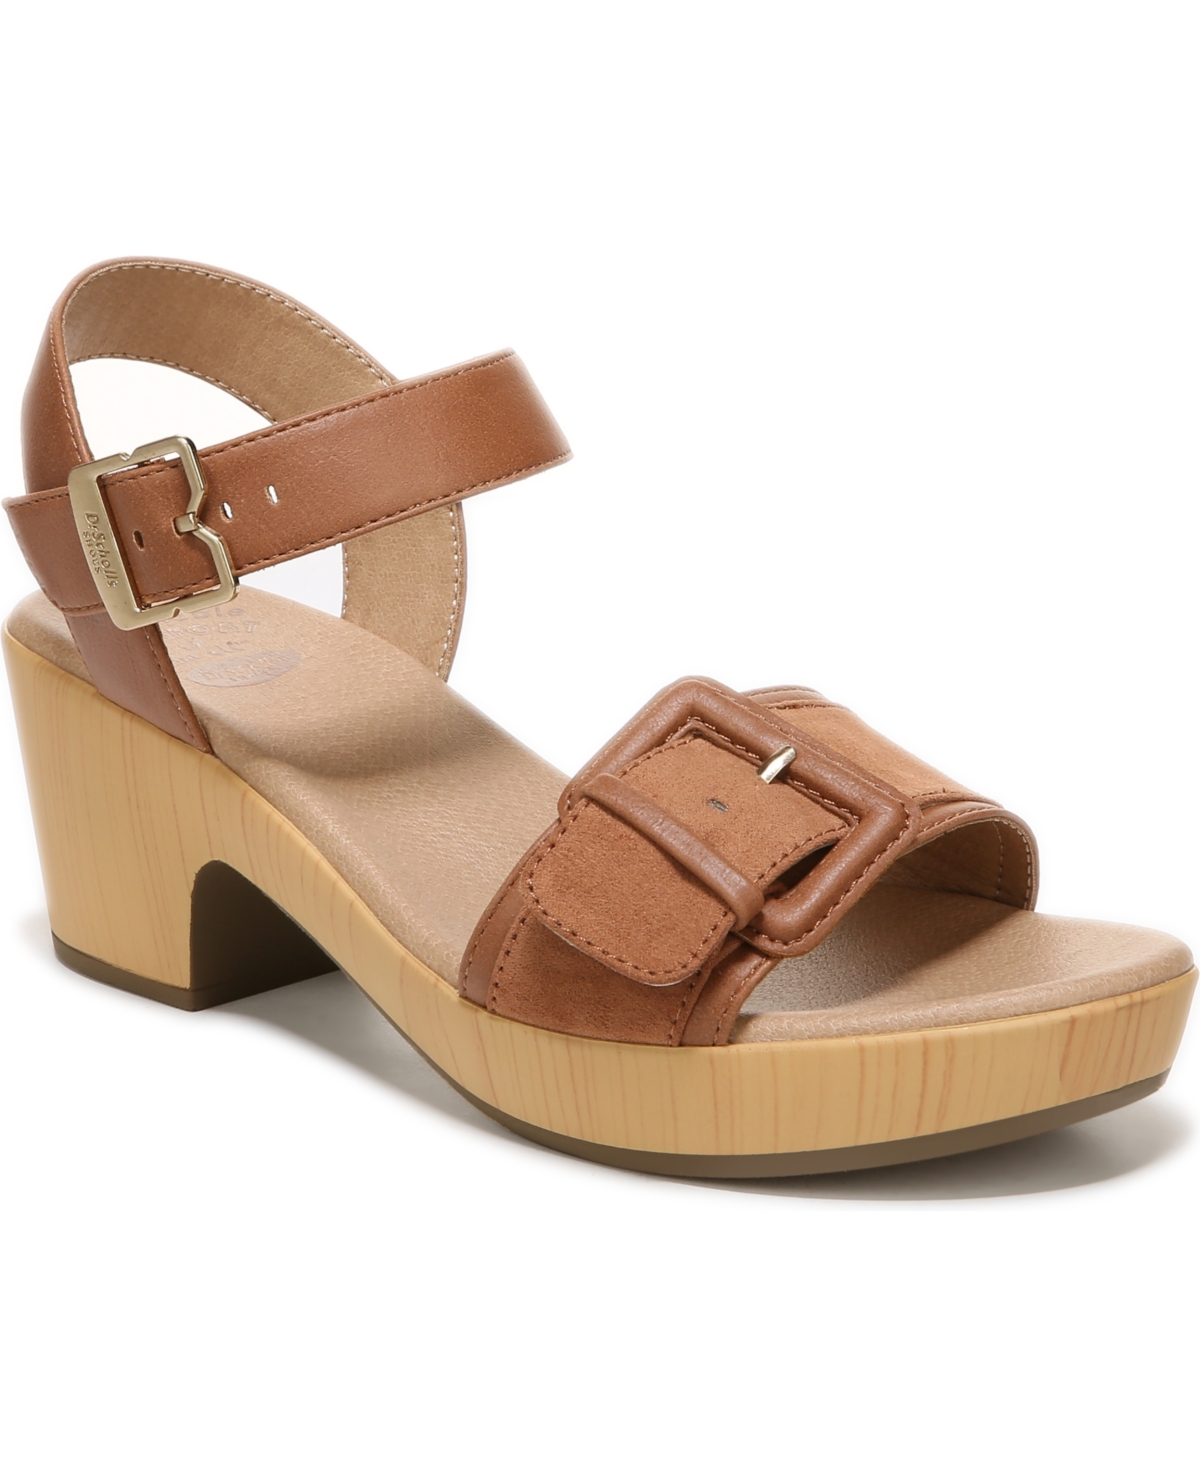 Women's Felicity Too Ankle Strap Sandals - Honey Brown Faux Leather/Fabric